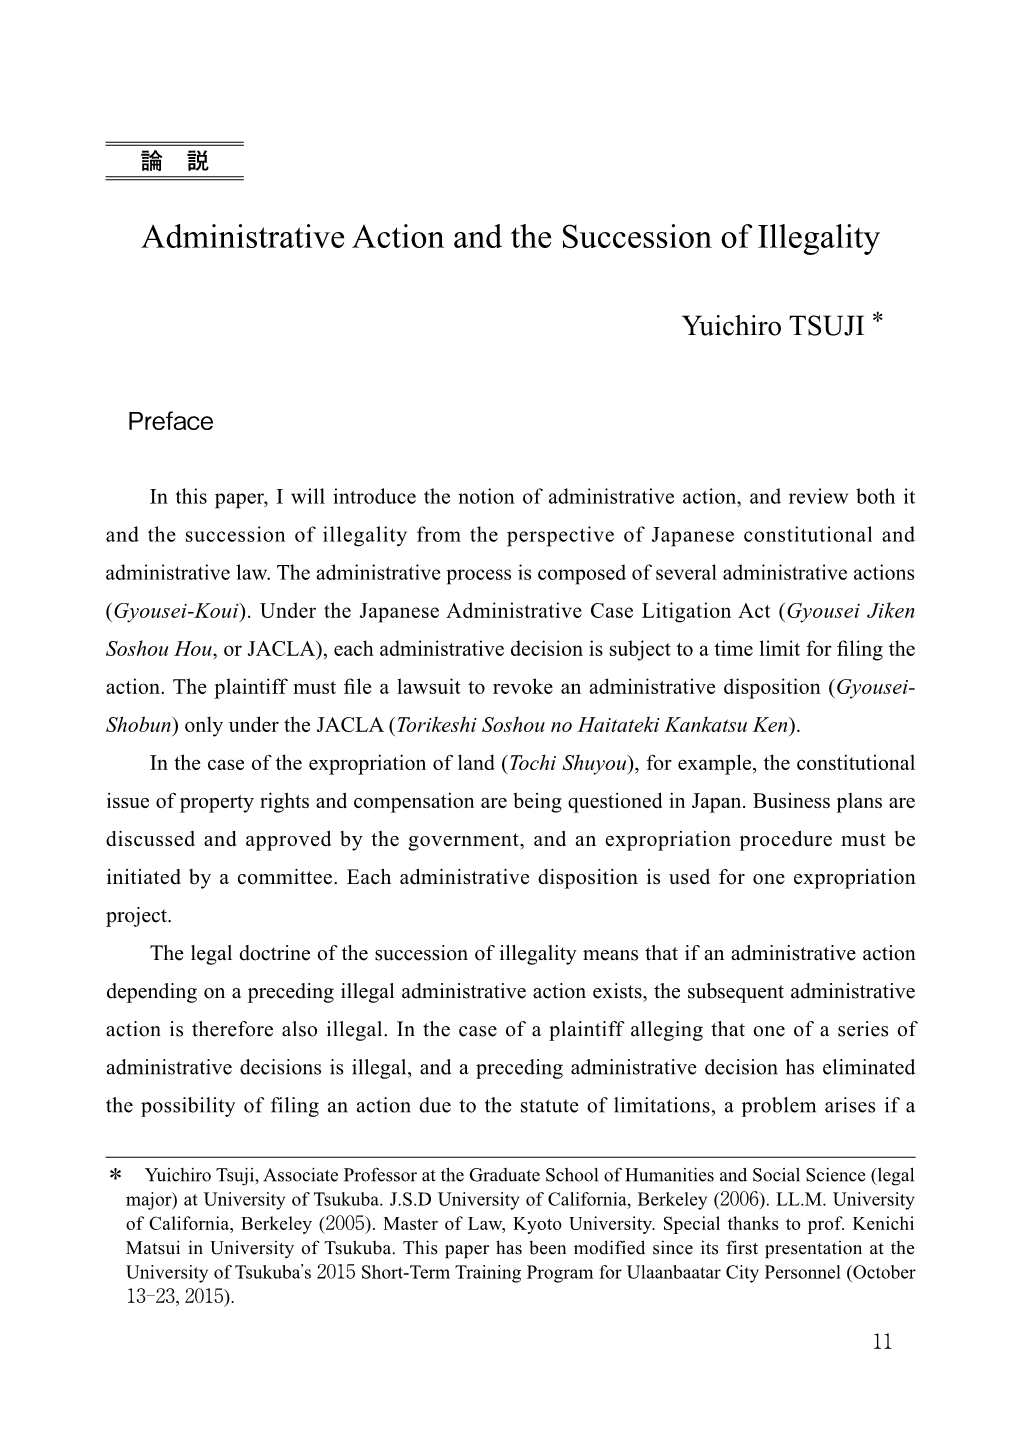 Administrative Action and the Succession of Illegality